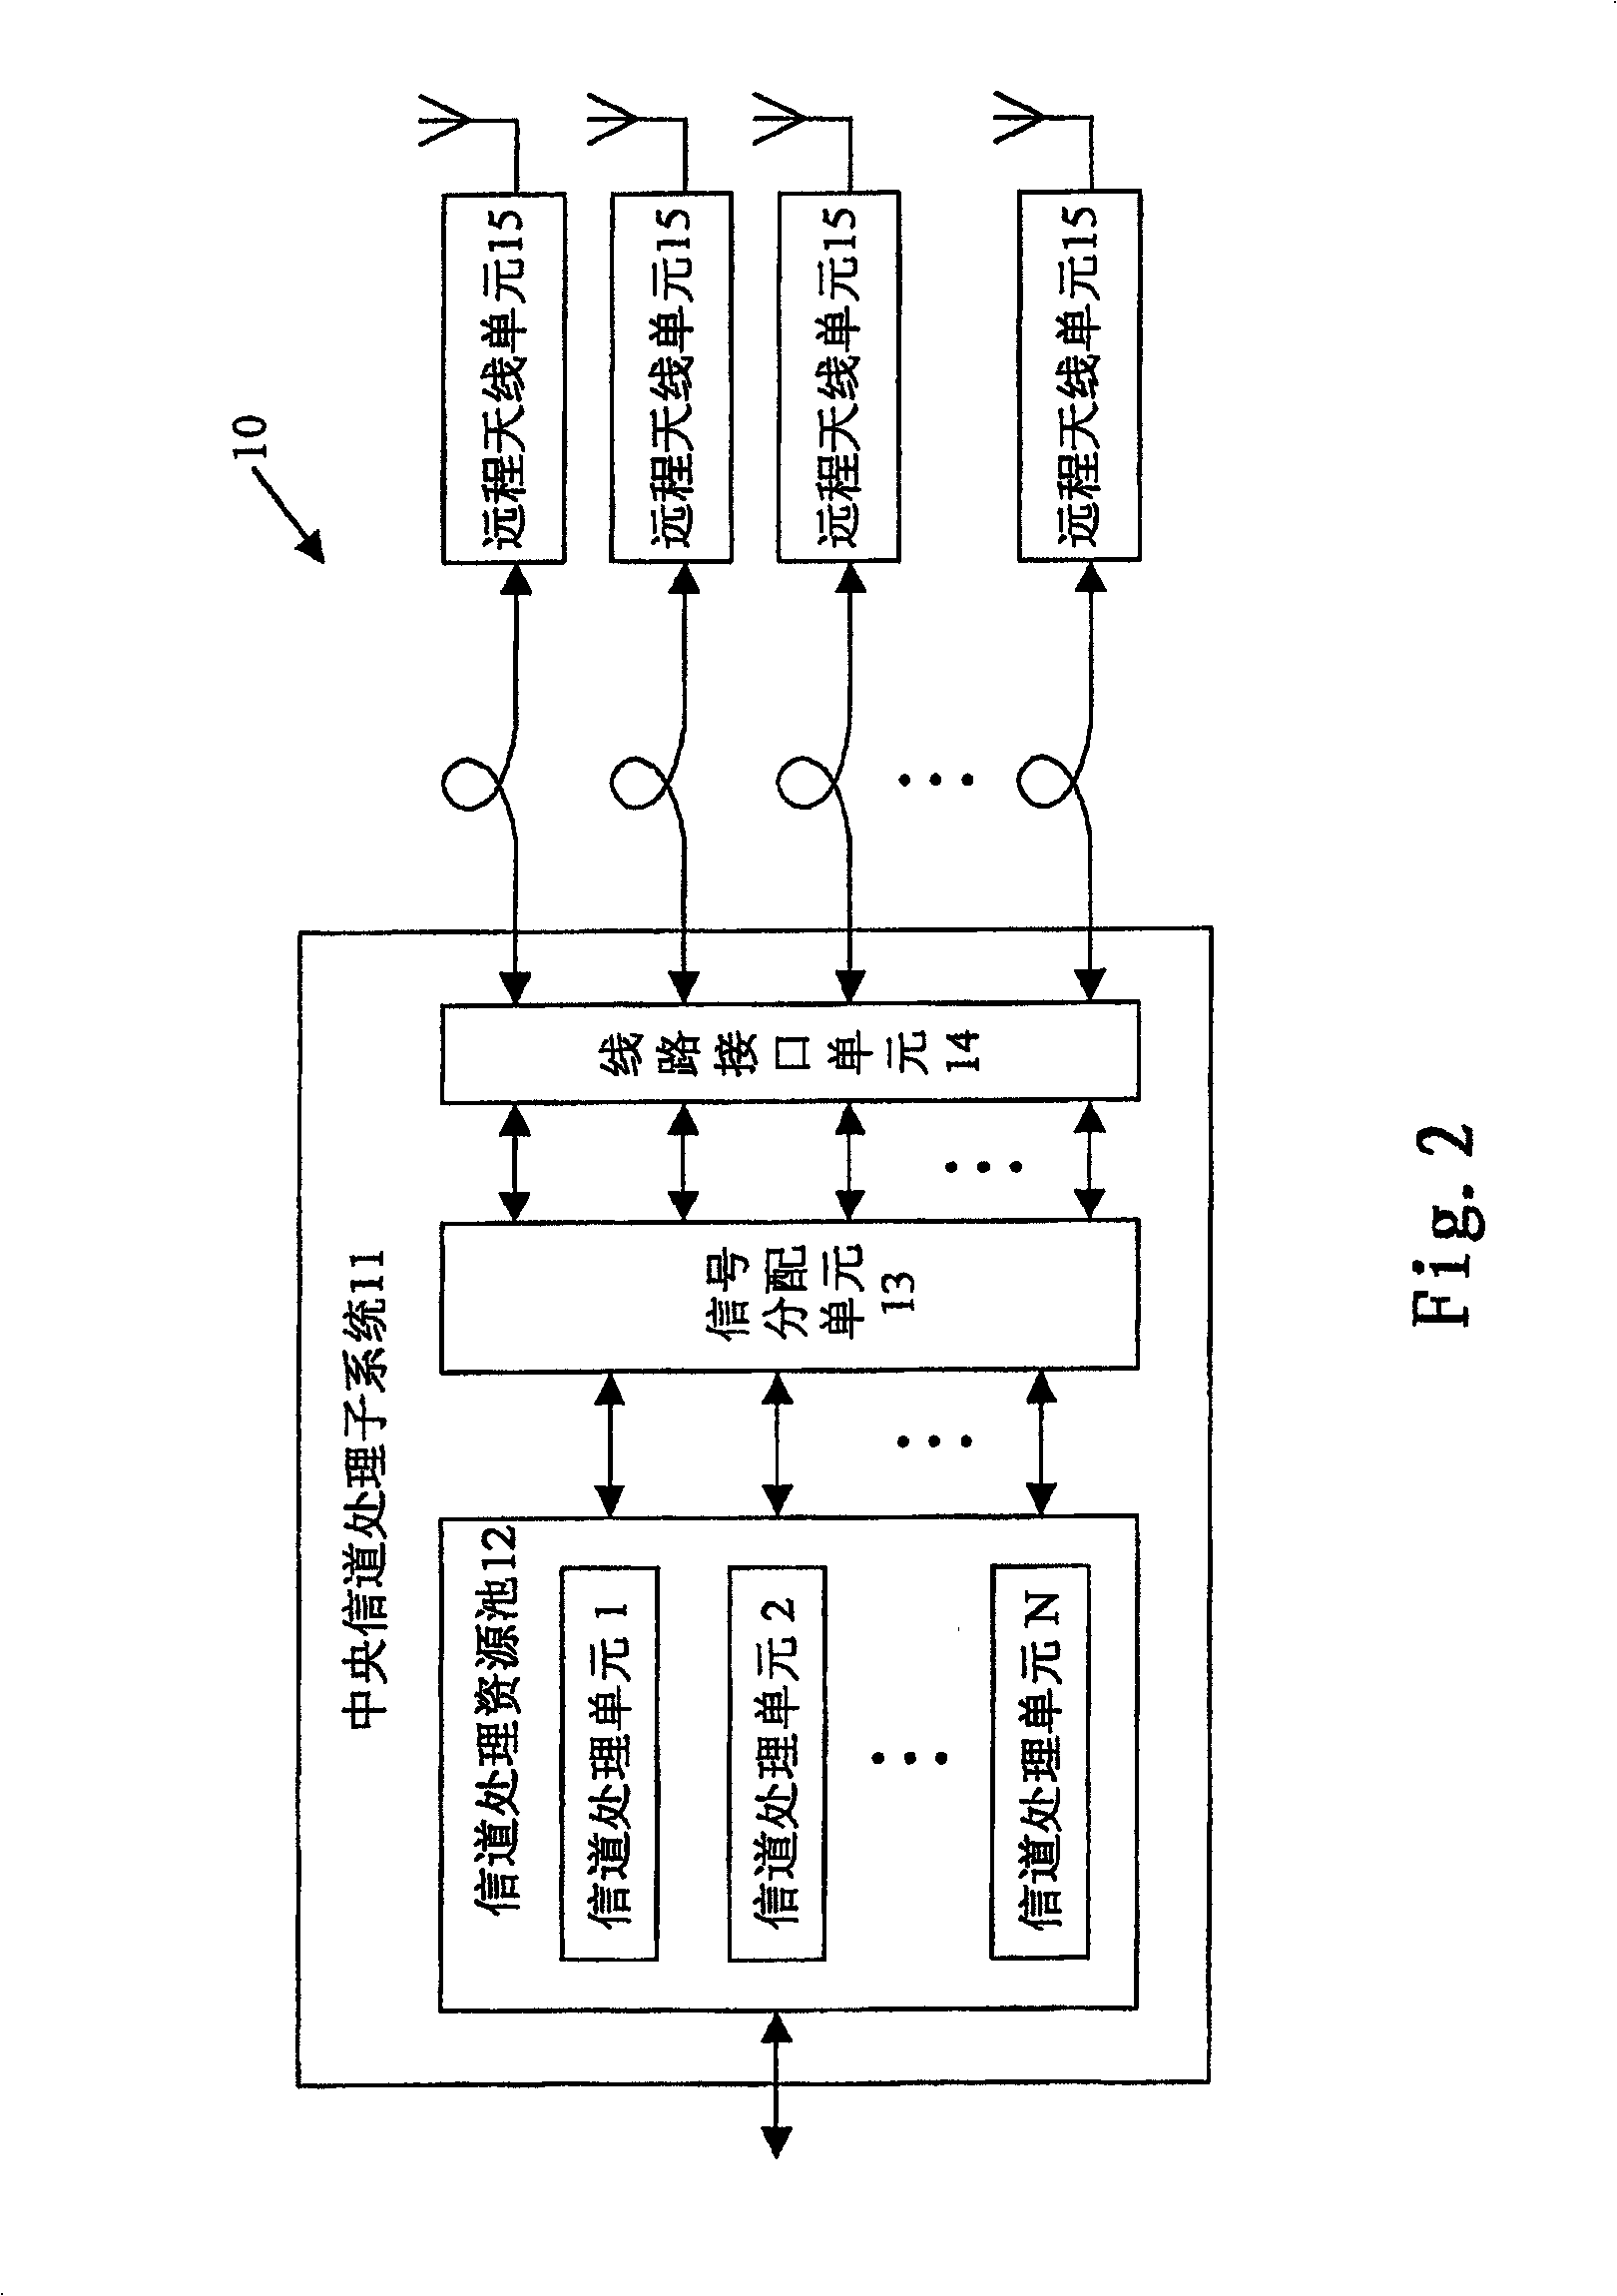 Distributed wireless system for controlling the resource centrally